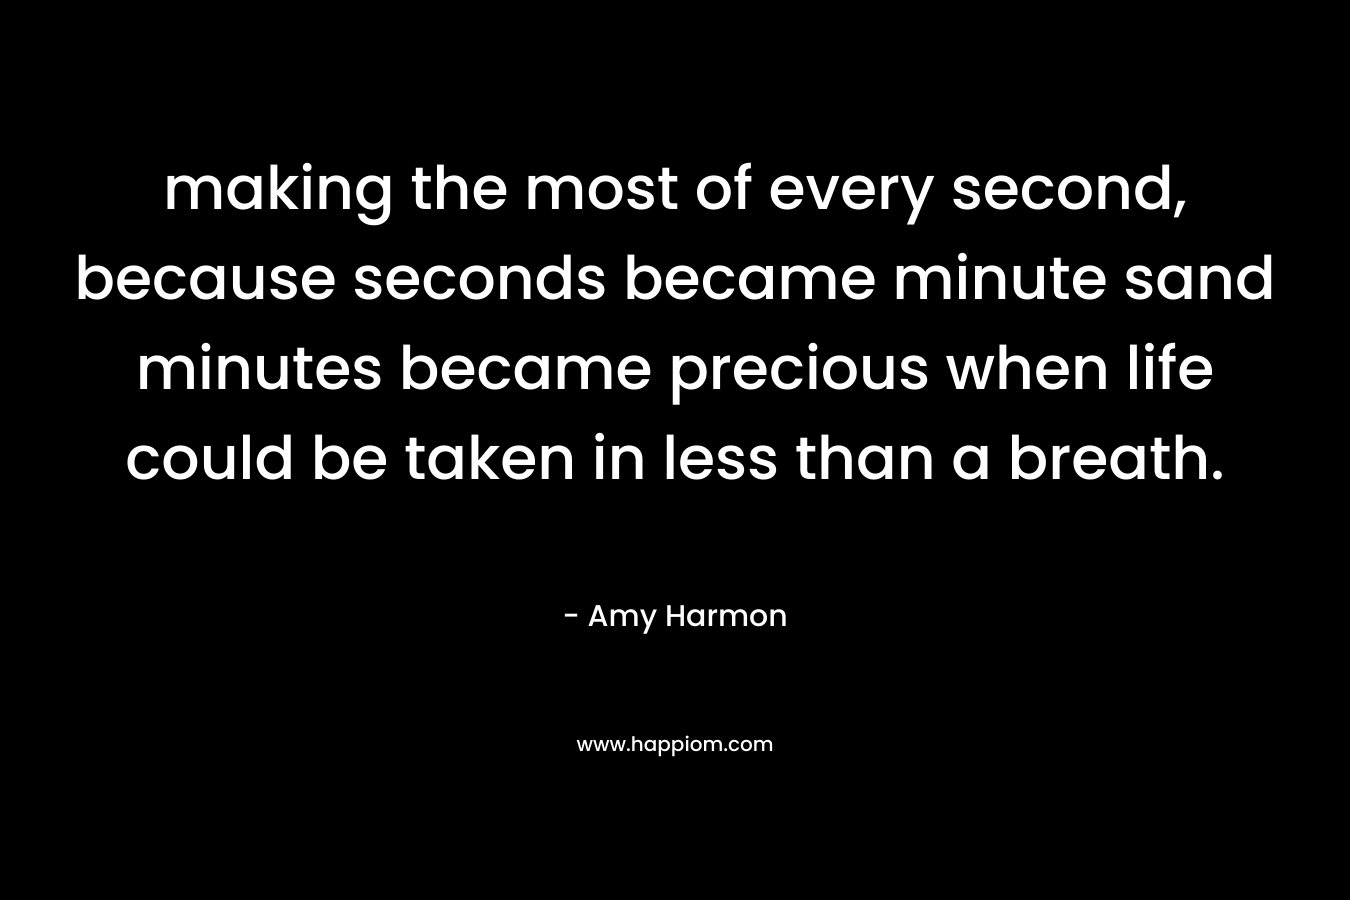 making the most of every second, because seconds became minute sand minutes became precious when life could be taken in less than a breath.